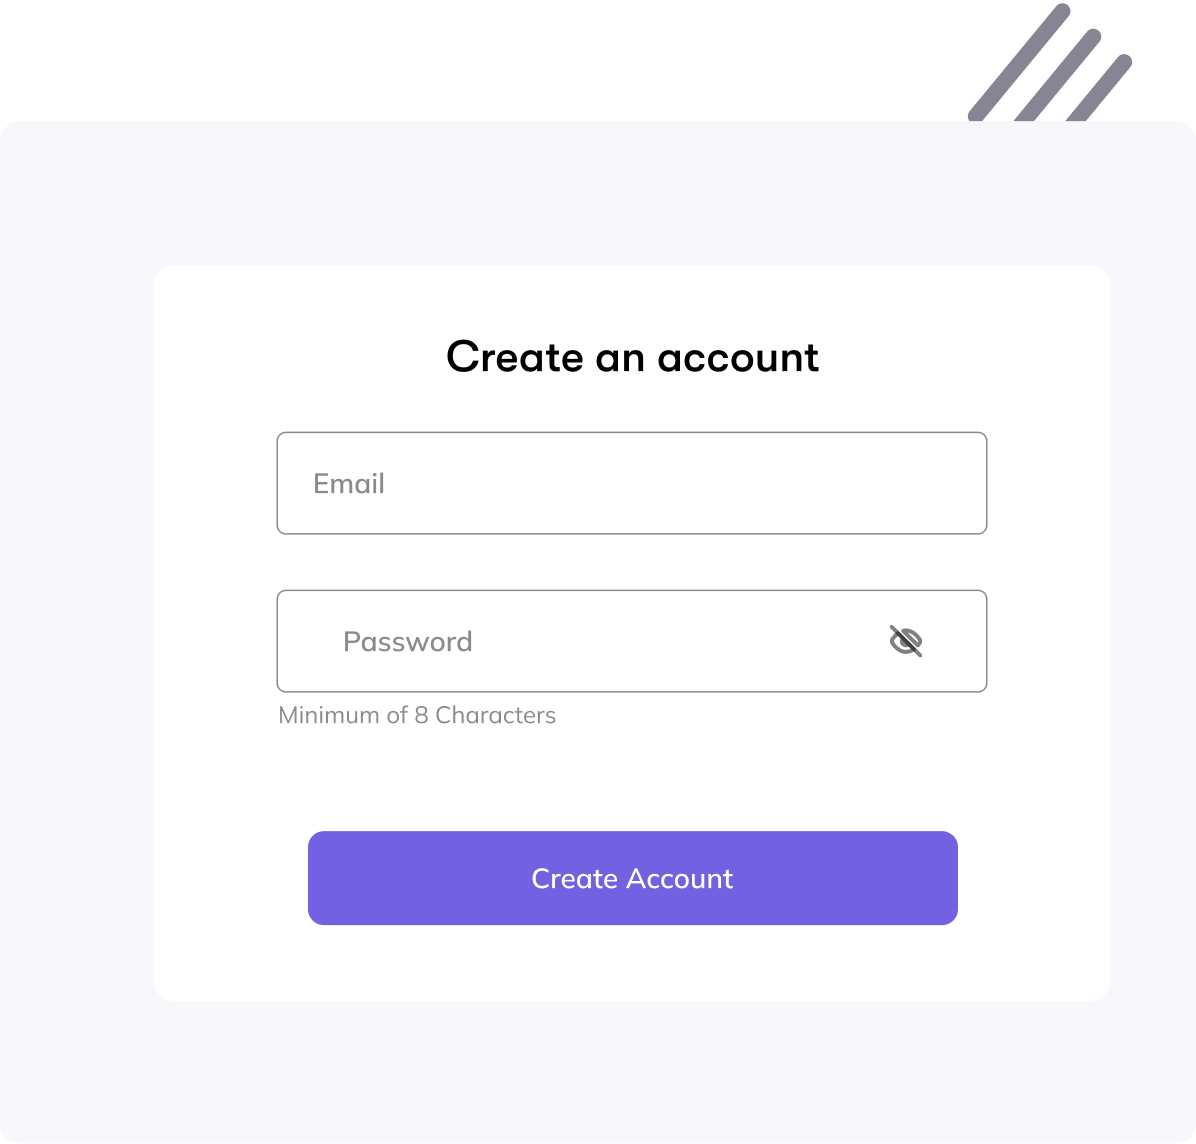 Create your account